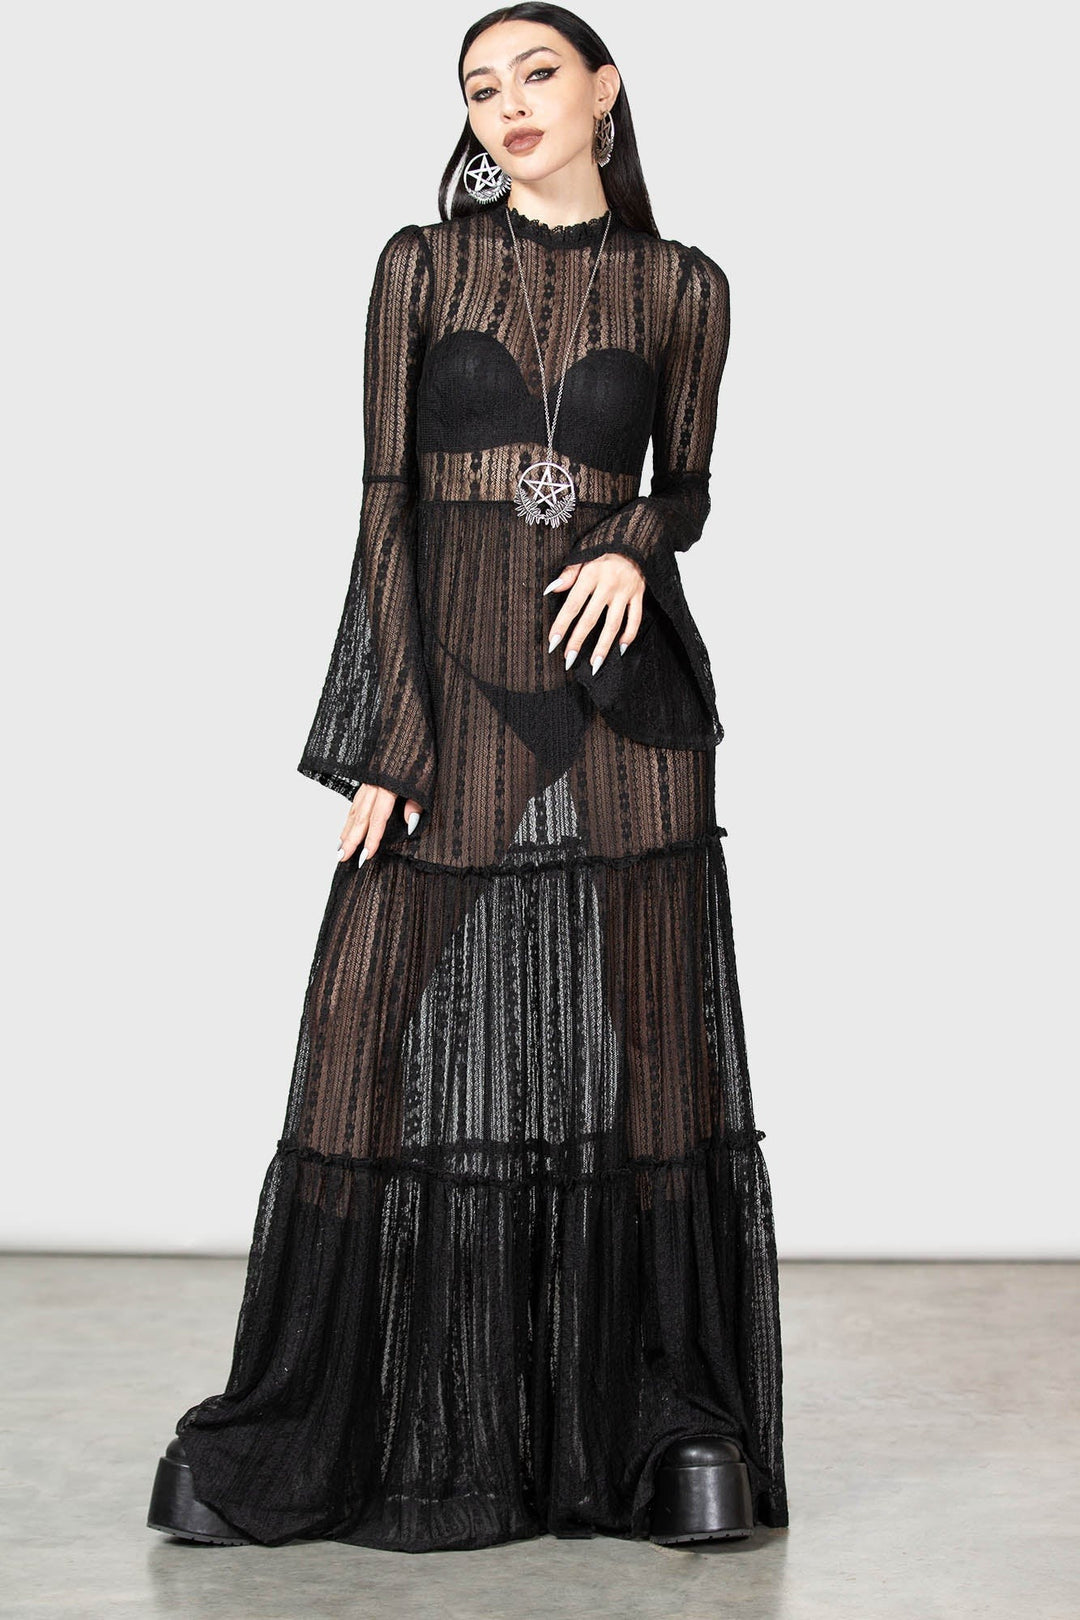 lace old fashioned goth dress